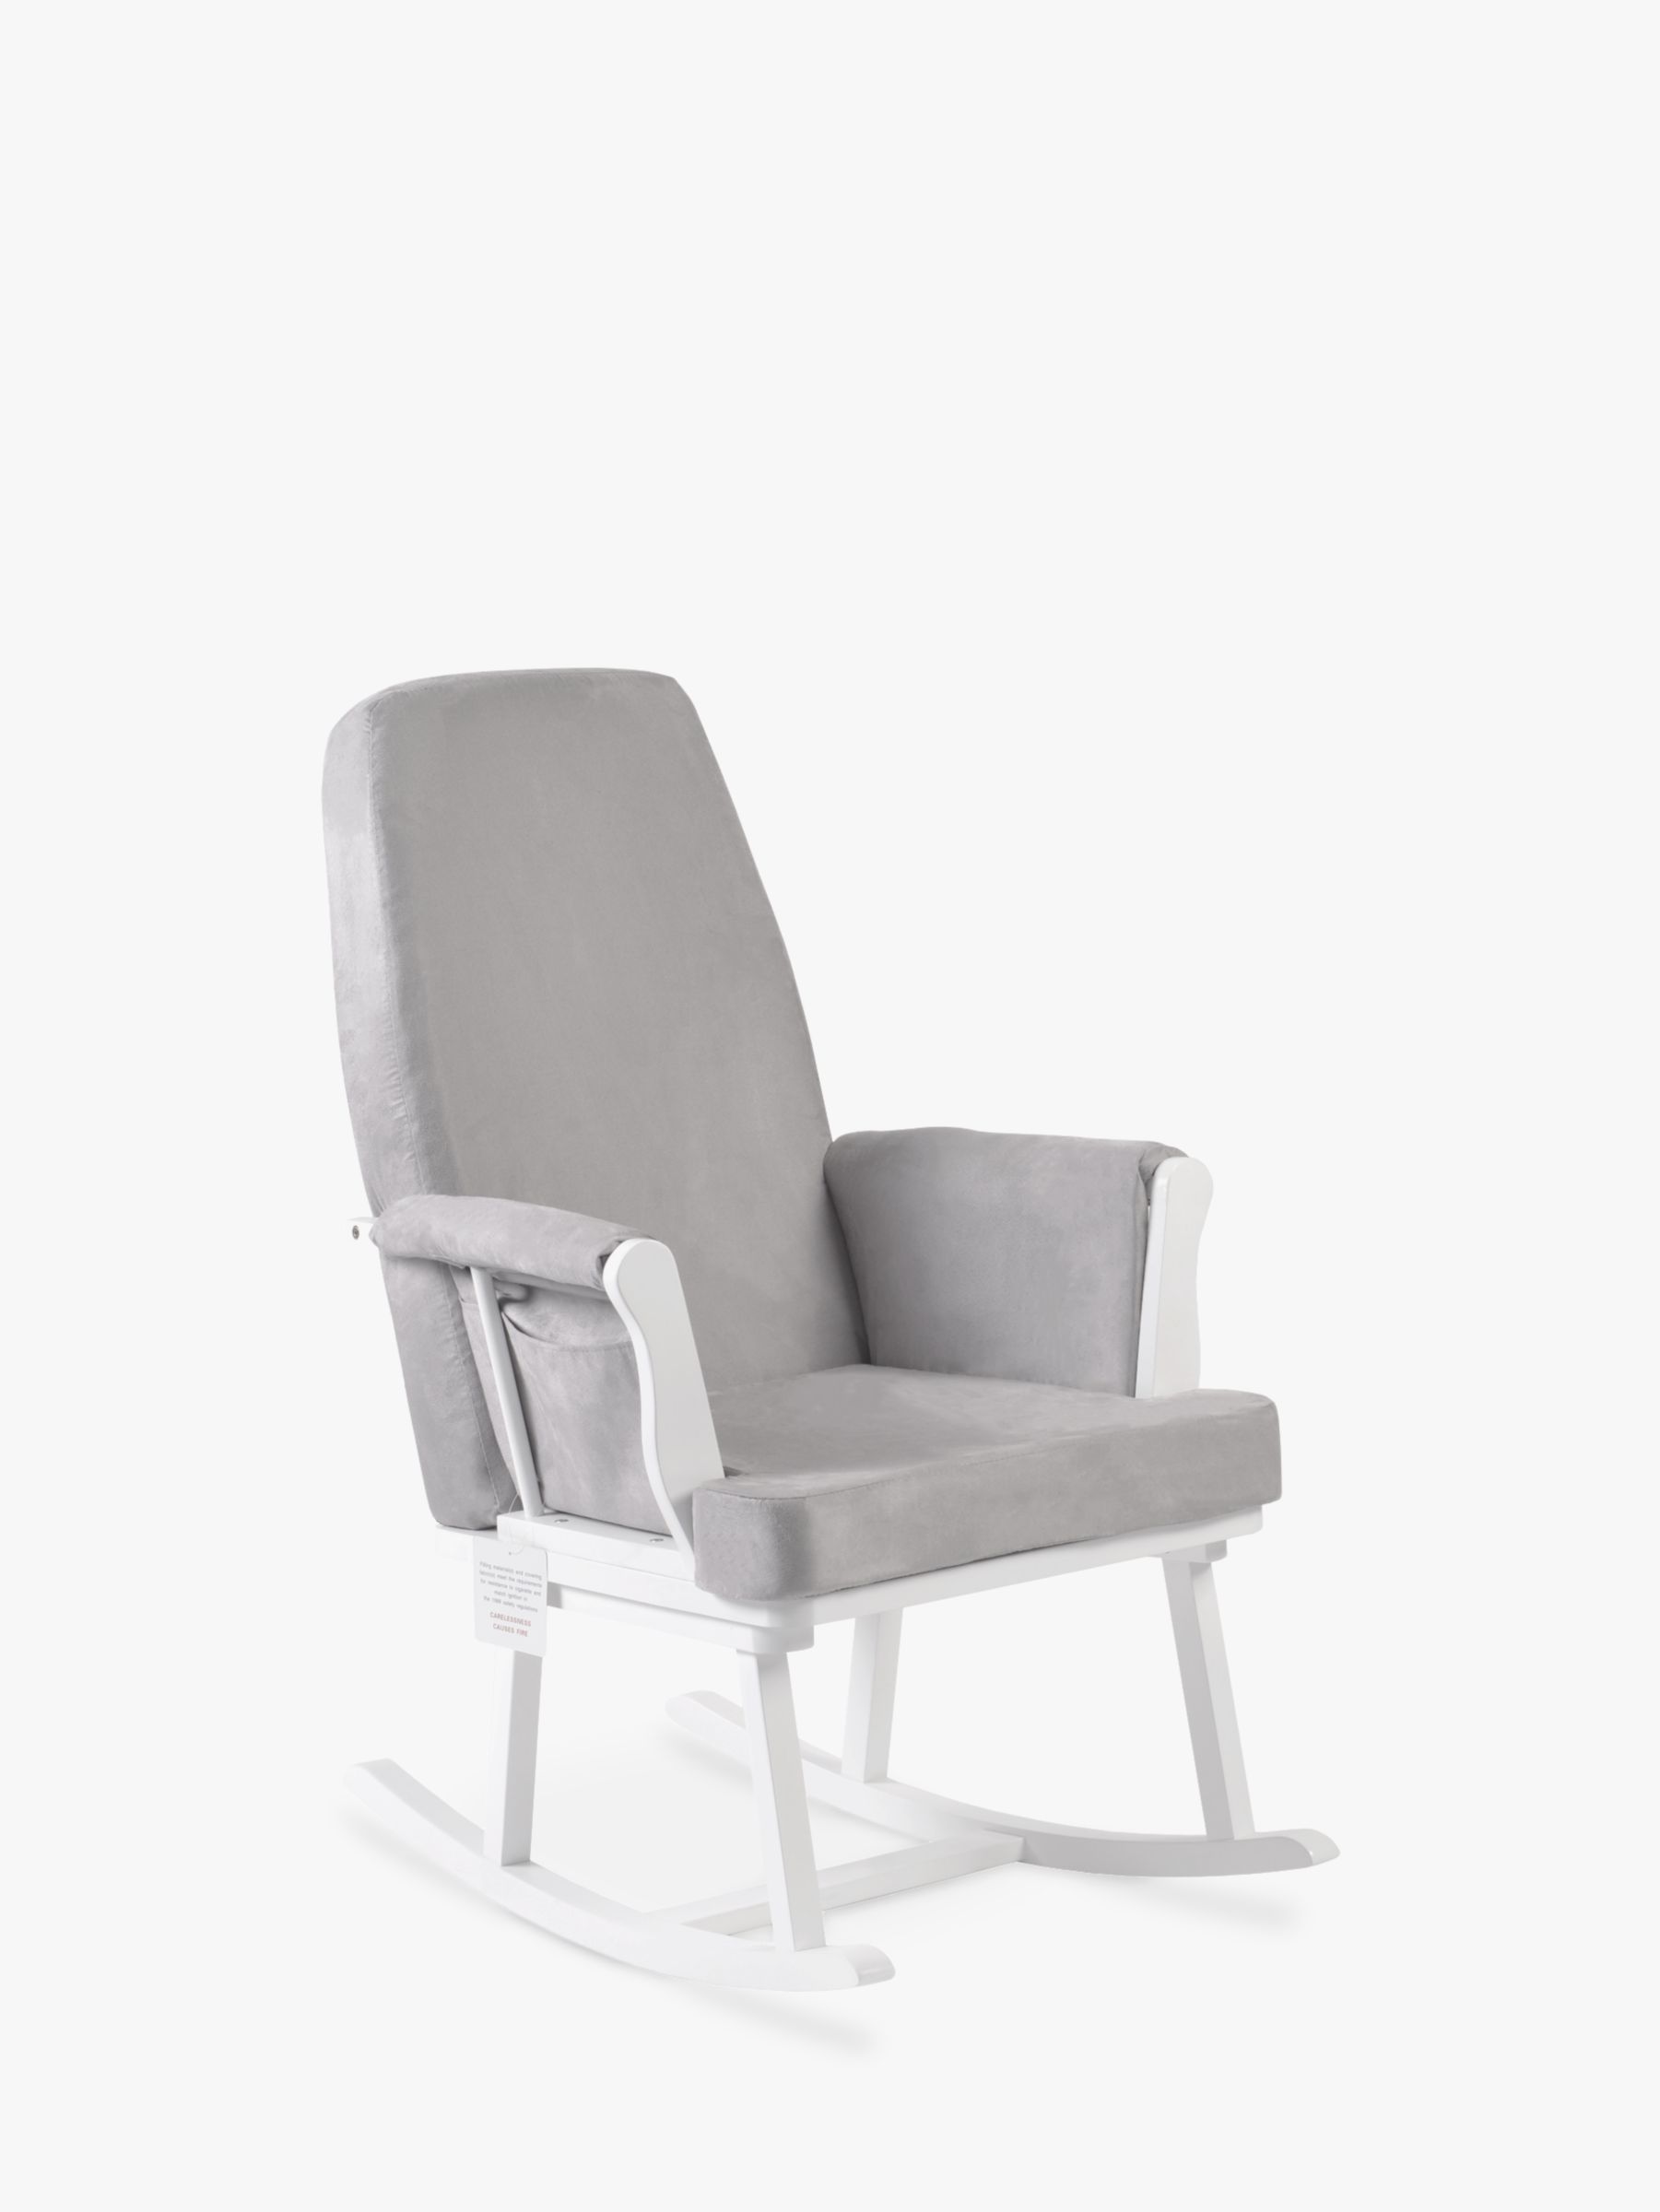 grey and white nursing chair